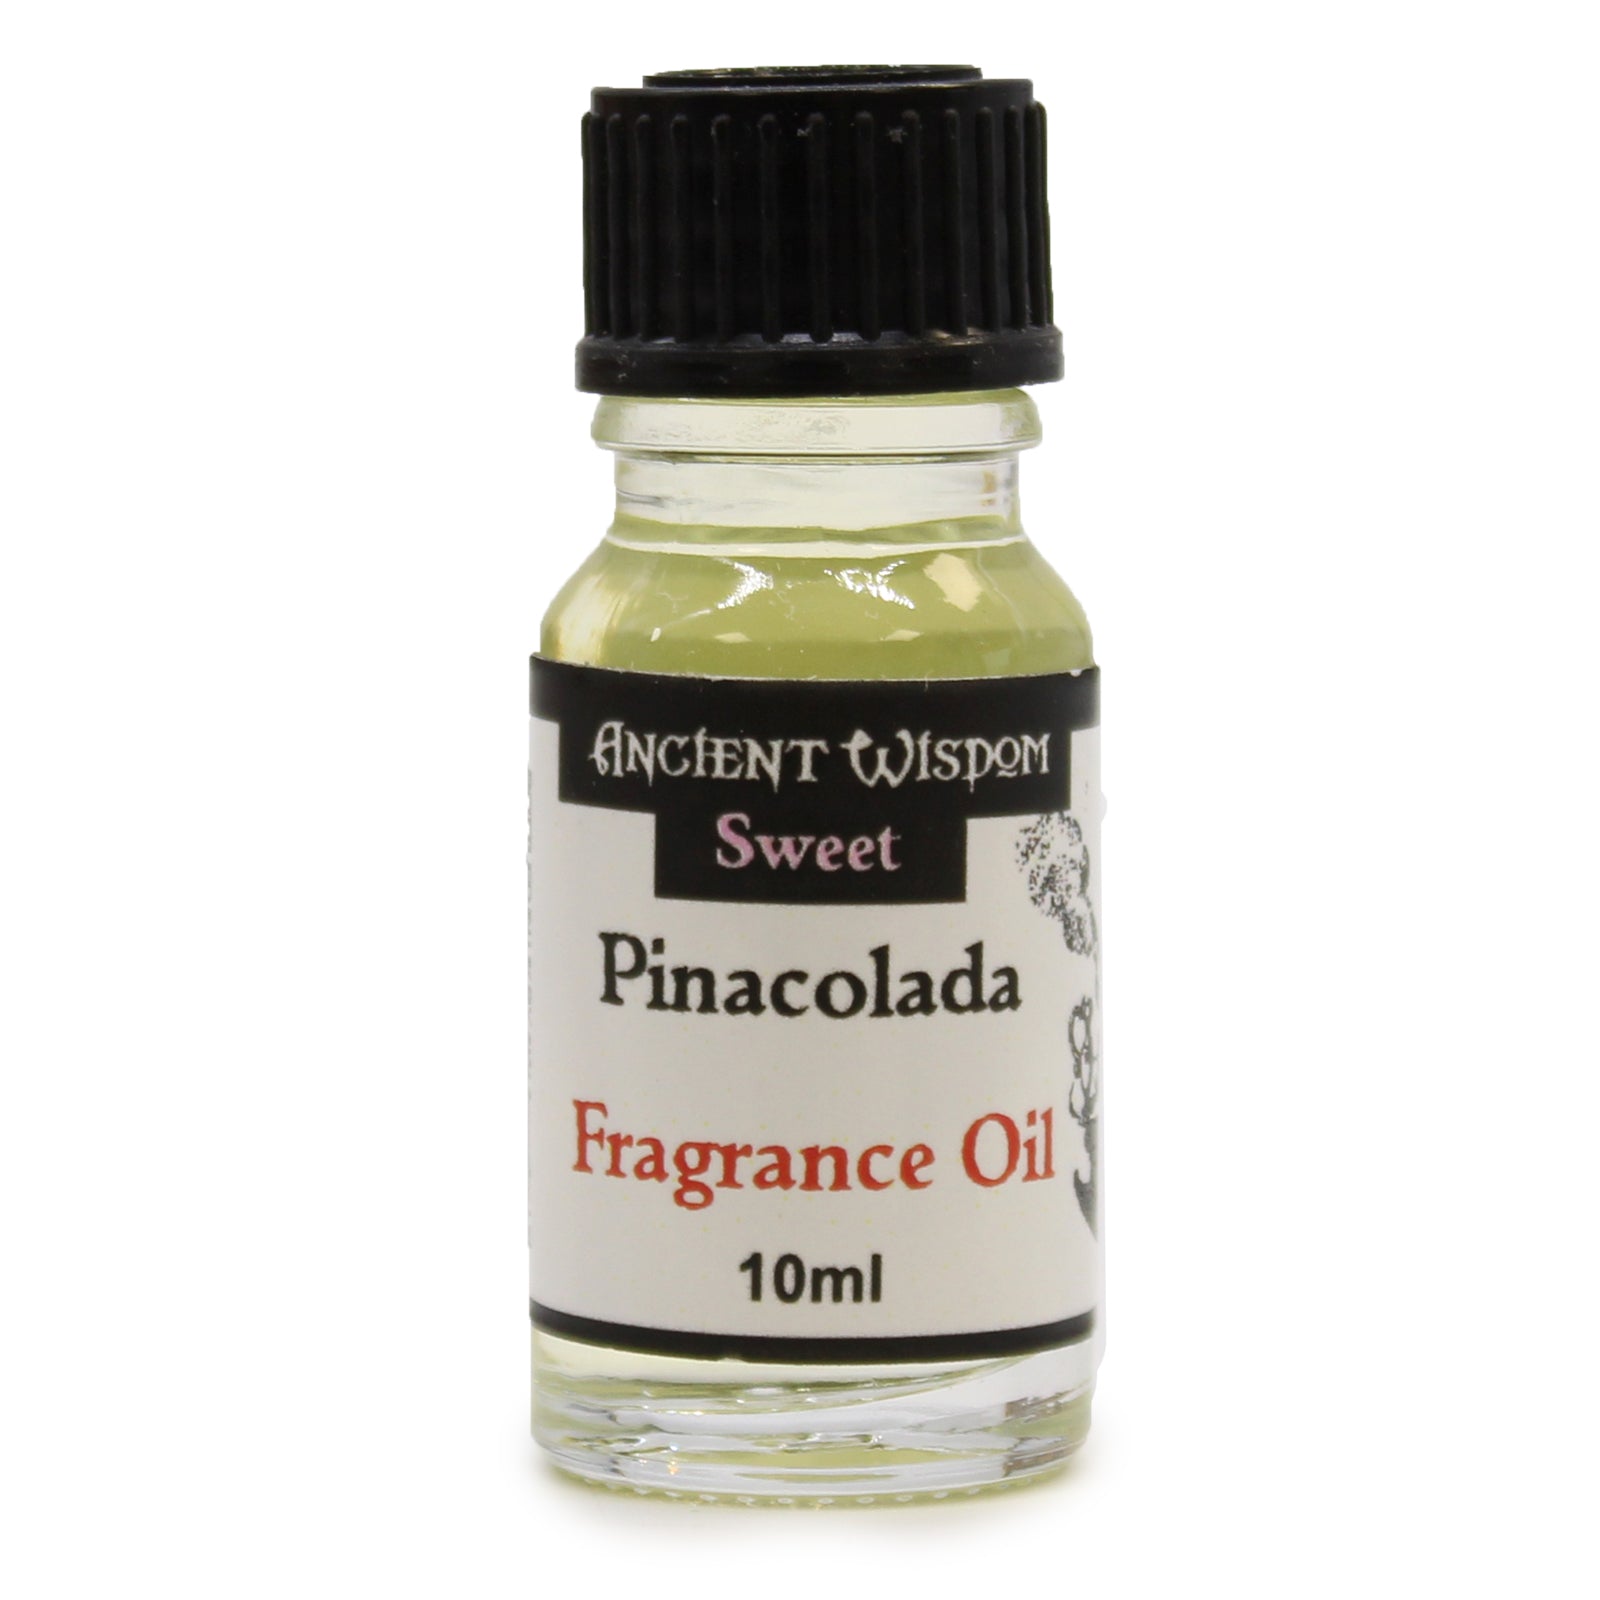 View Pinacolada Fragrance Oil 10ml information